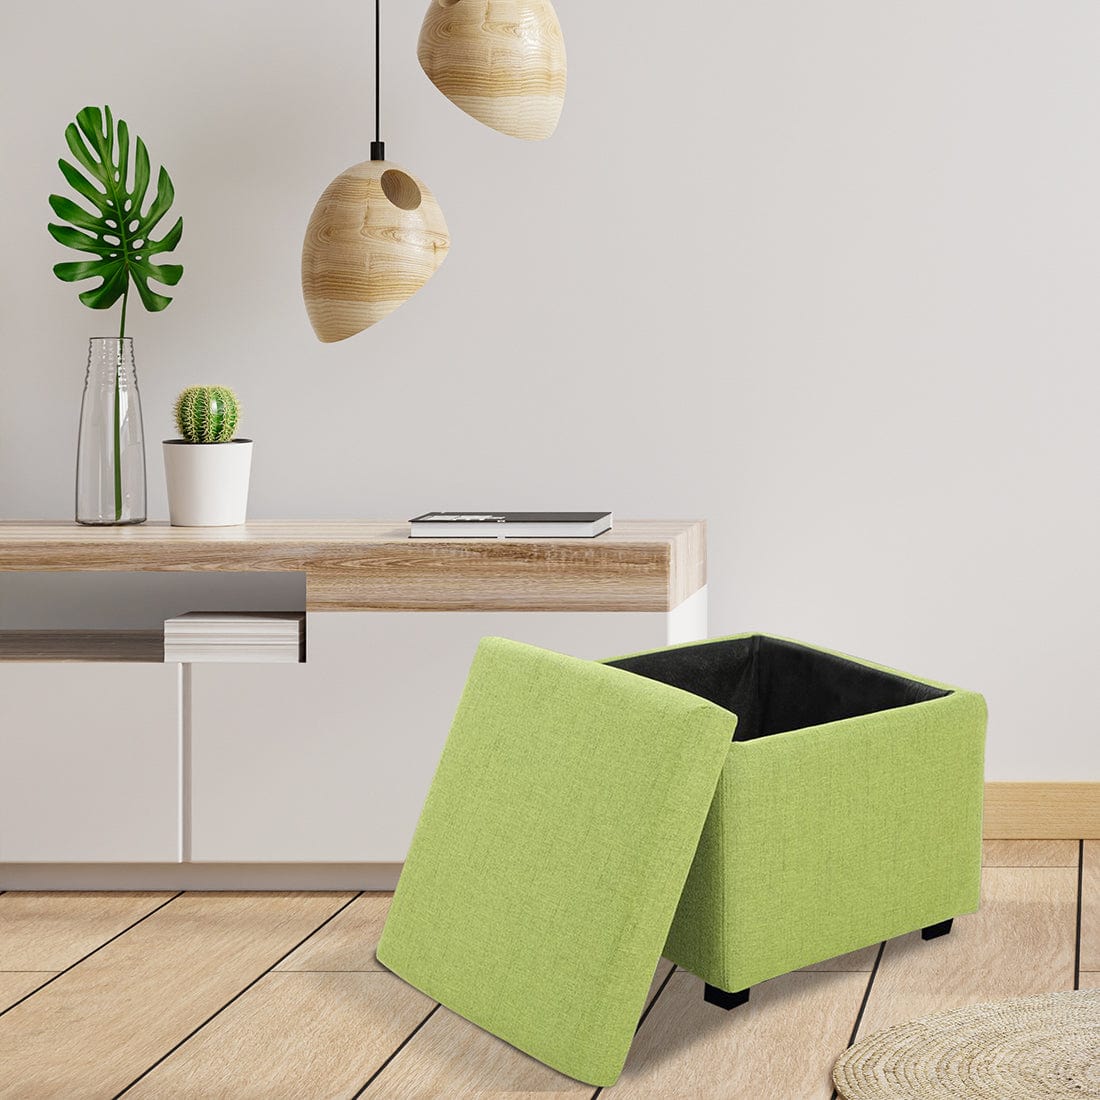 DOE BUCK SQUARE STOAGE OTTOMAN WITH STORAGE GREEN